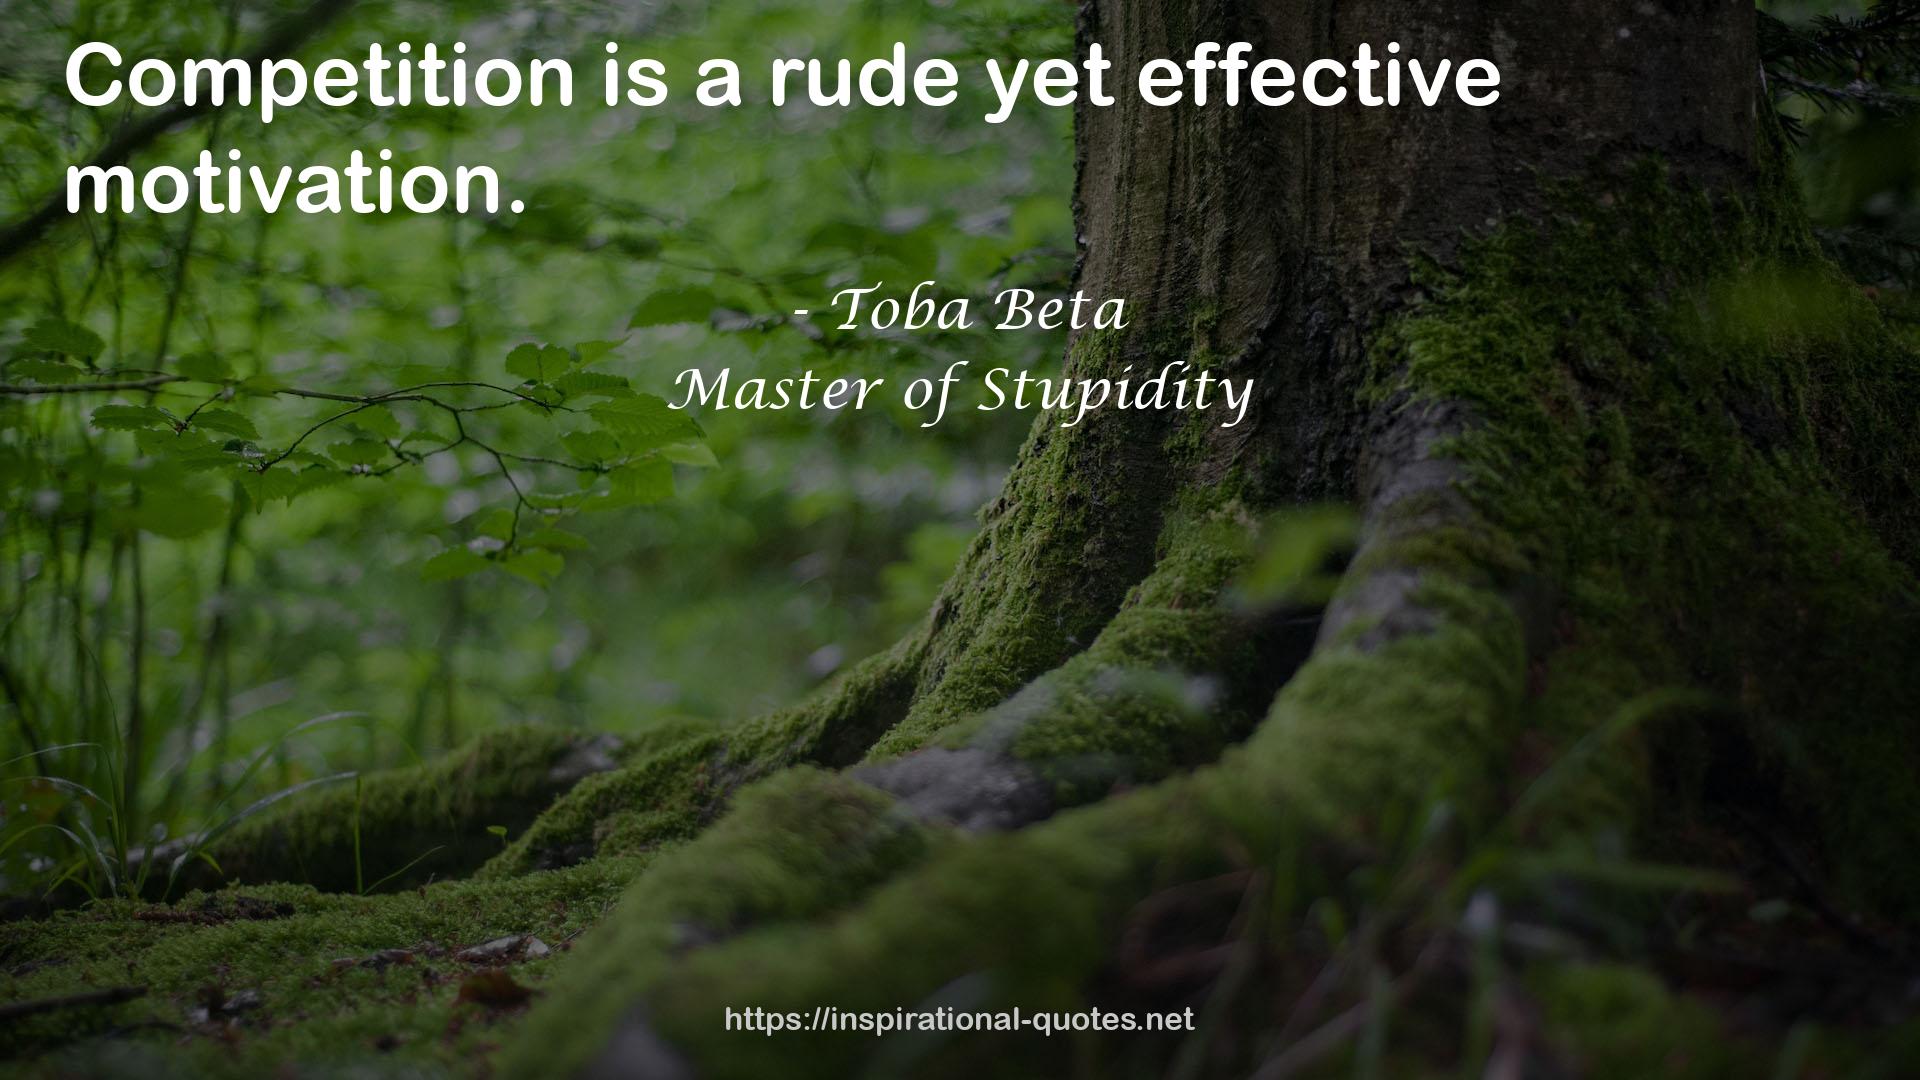 Master of Stupidity QUOTES